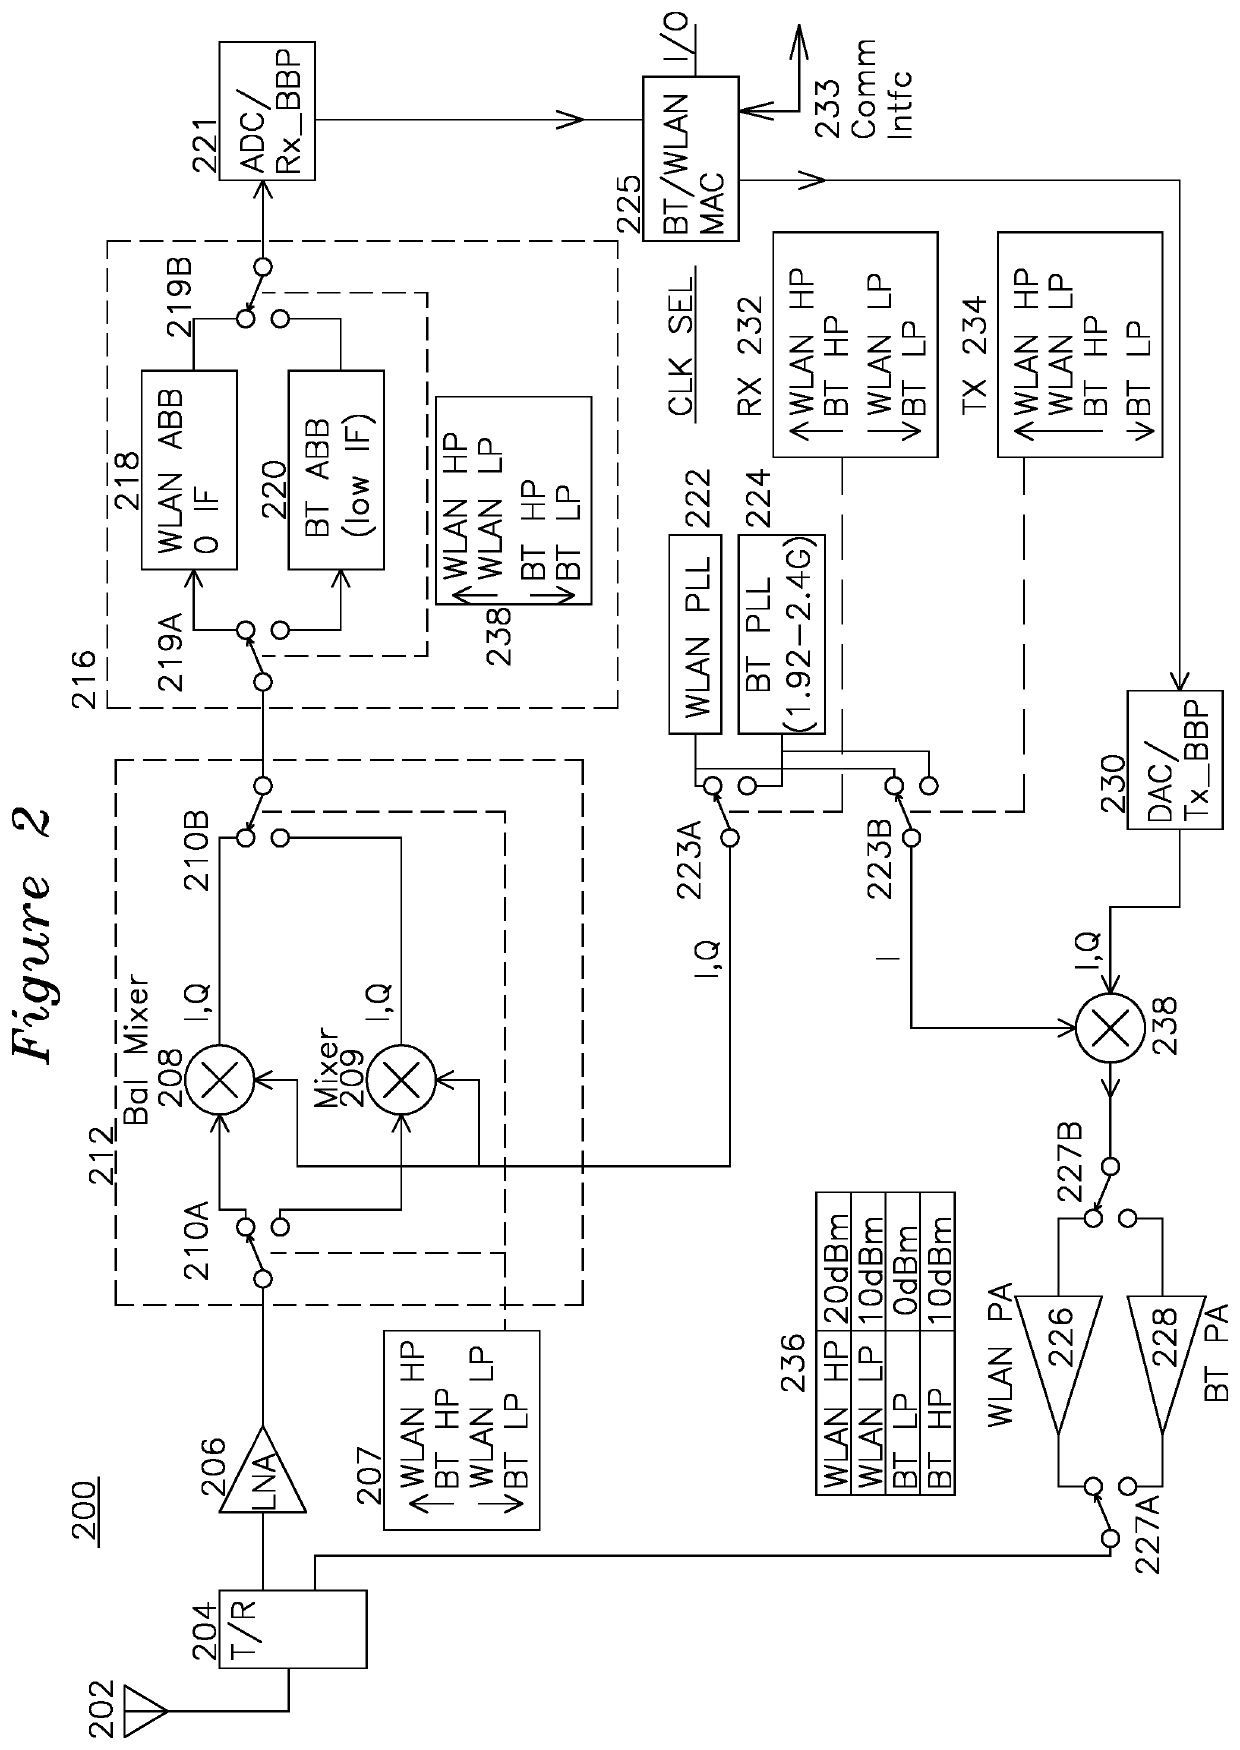 Multiplexed signal processing system for Bluetooth and WLAN transceiver